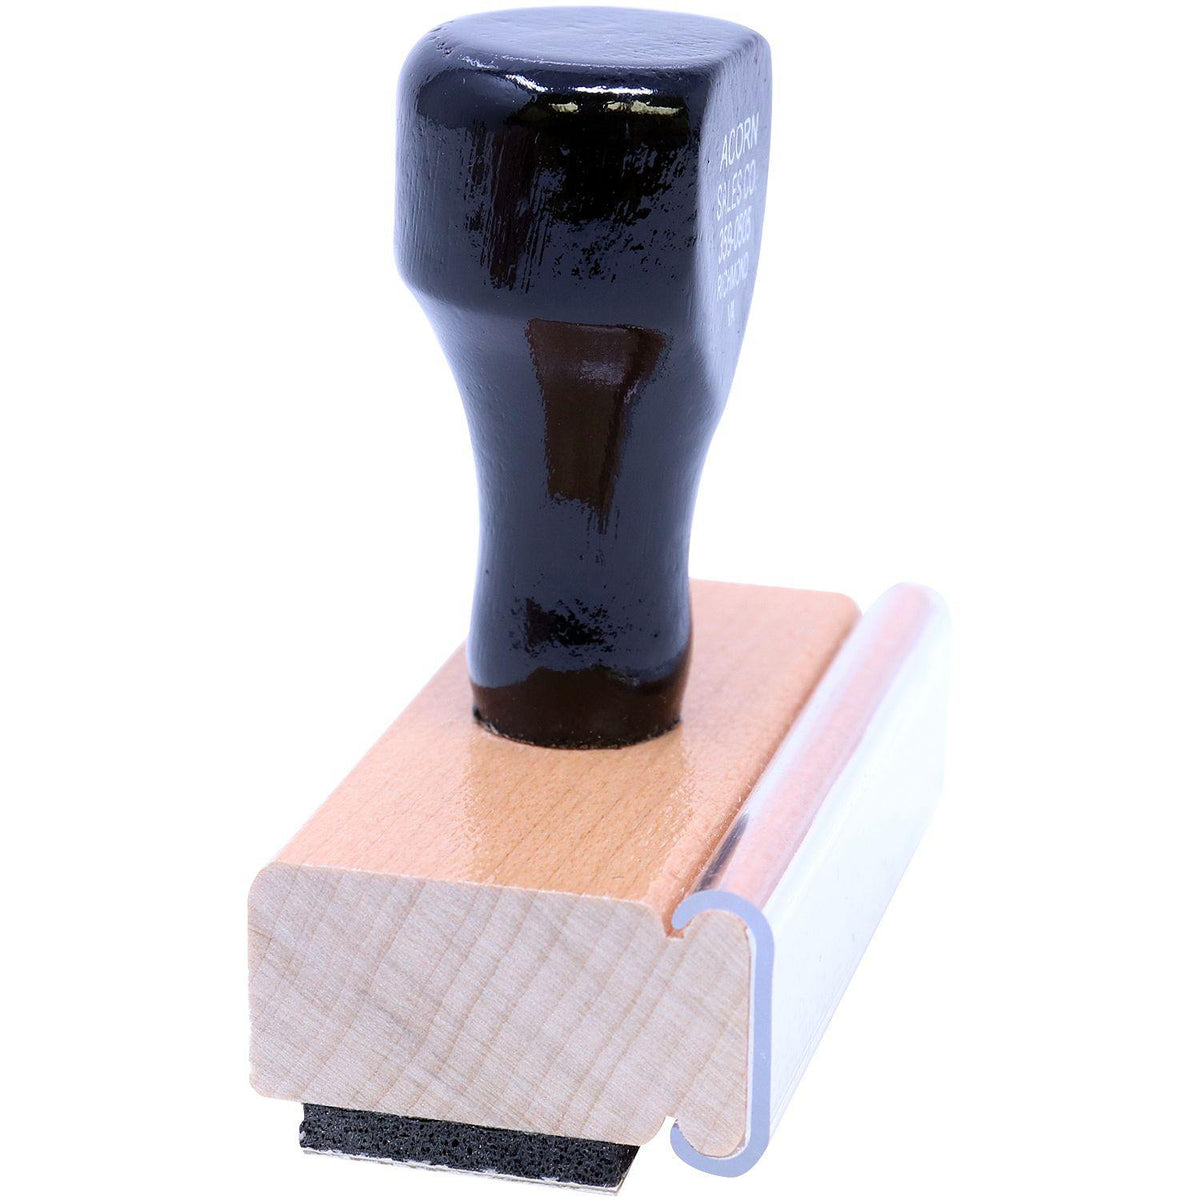 Side View of Large Revised with Box Rubber Stamp at an Angle